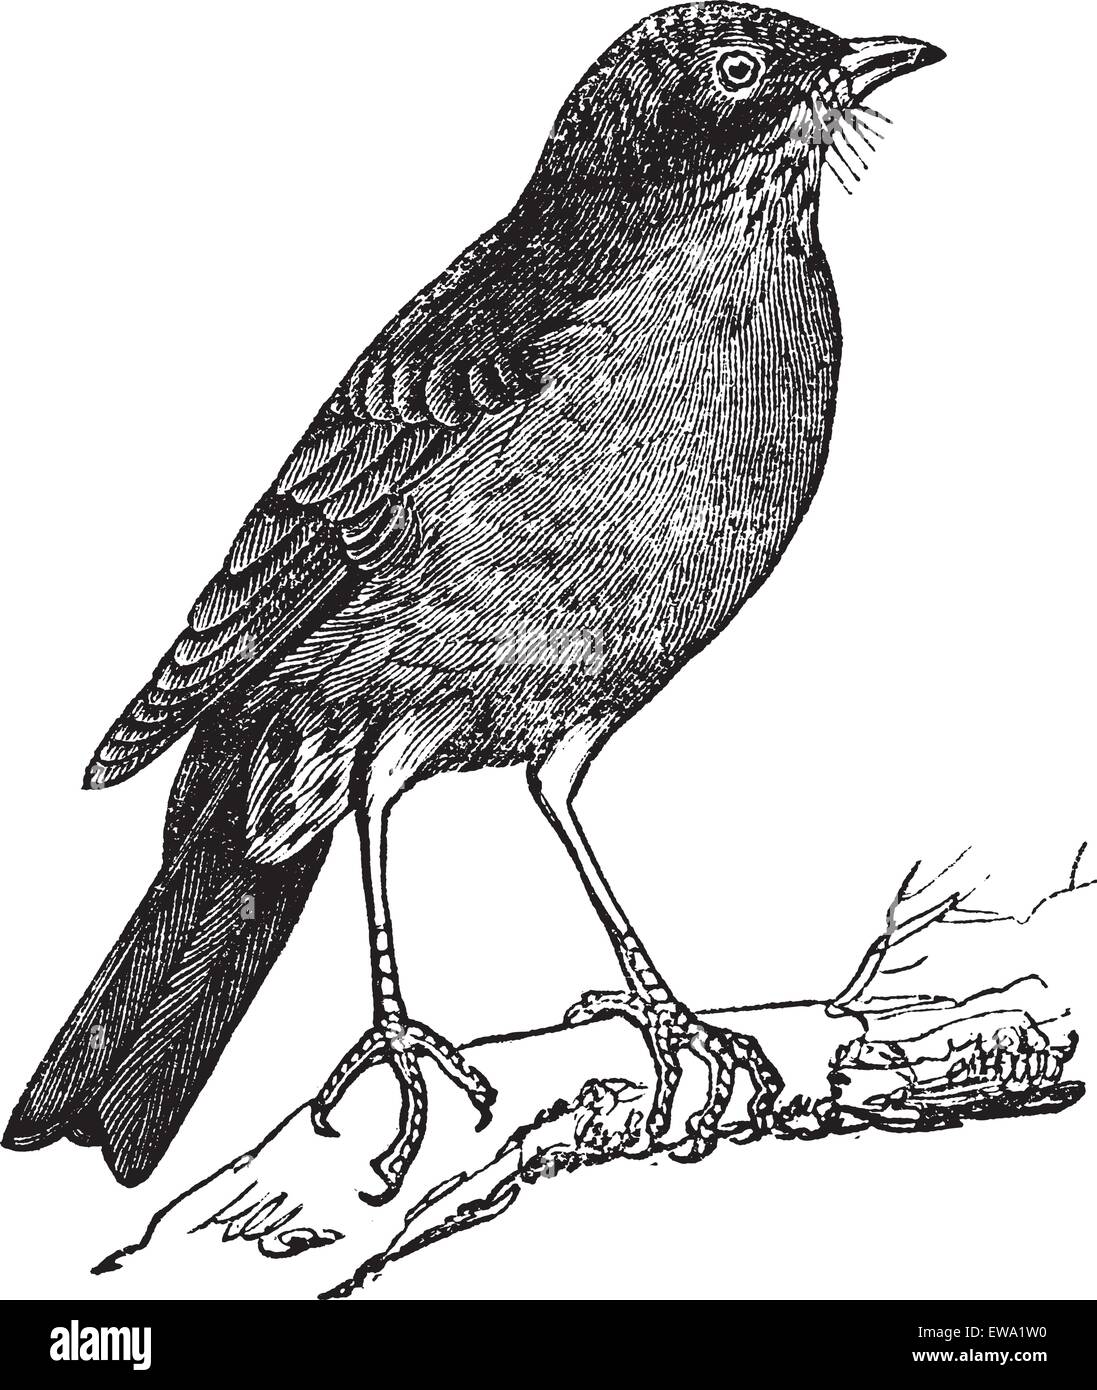 American Robin (Turdus migratorius) vintage engraving. Old engraved illustration of American robin perched on tree branch Stock Vector